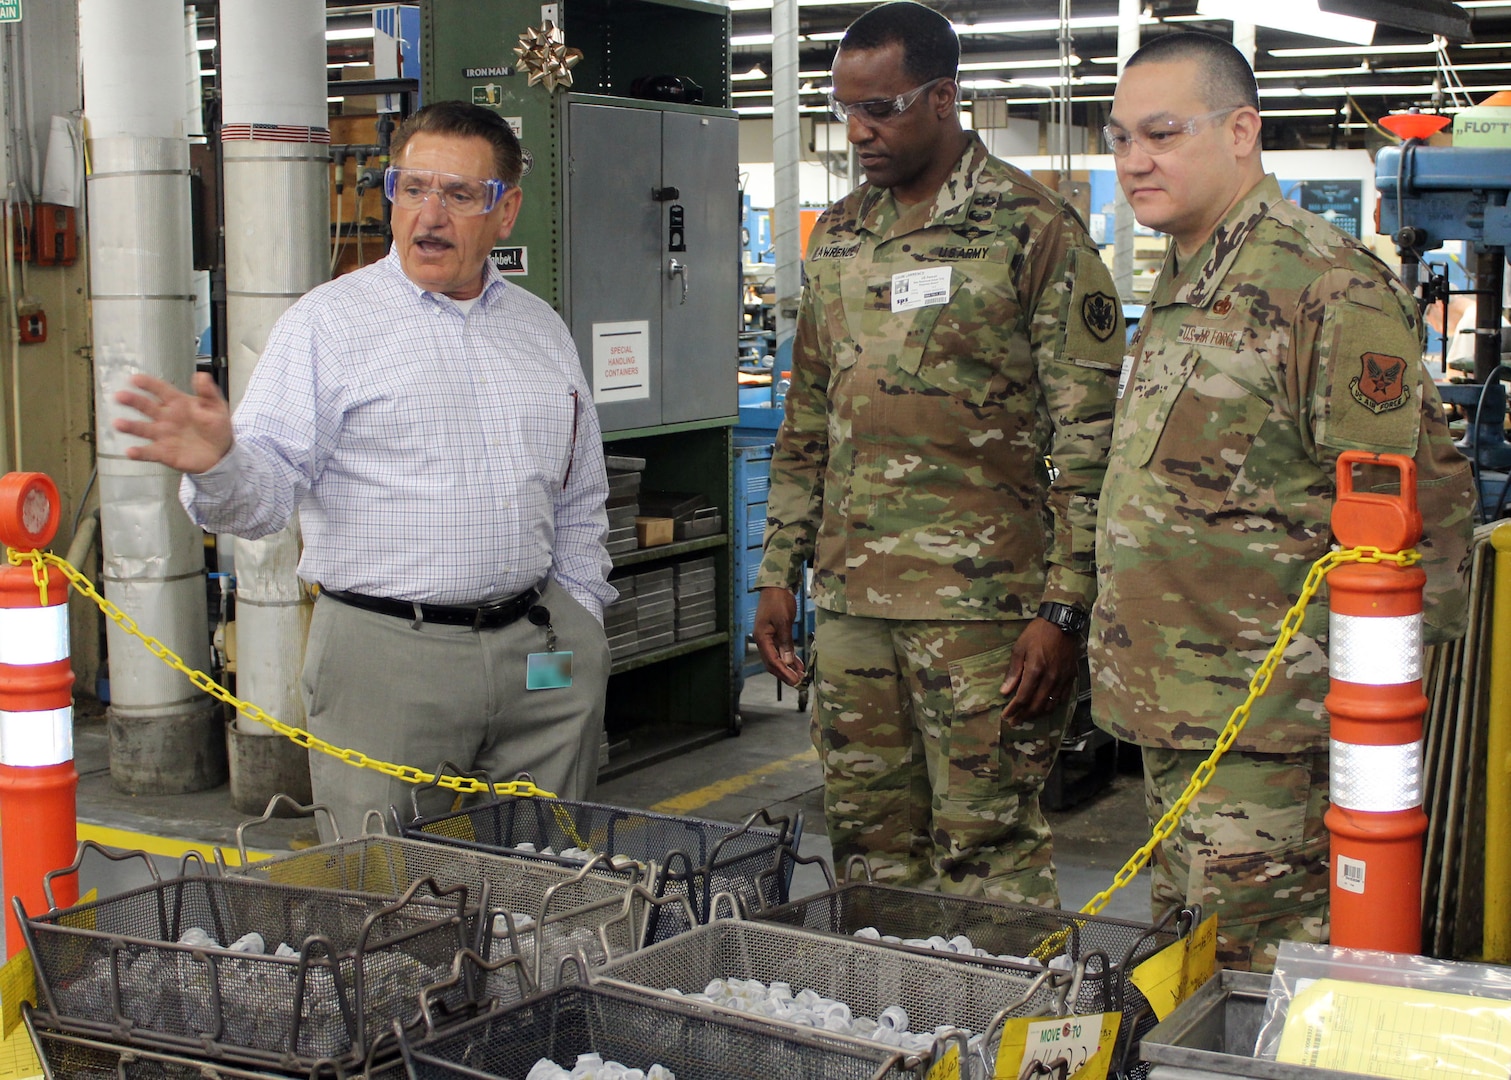 DLA Troop Support Commander Army Brig. Gen. Gavin Lawrence, center, and Industrial Hardware Director Air Force Col. Adrian Crowley, right, listen as SPS Technologies Sales Manager Joseph DiGiacomo explains the manufacturing process that goes into items at the Jenkintown, Pennsylvania facility Feb. 5, 2020.